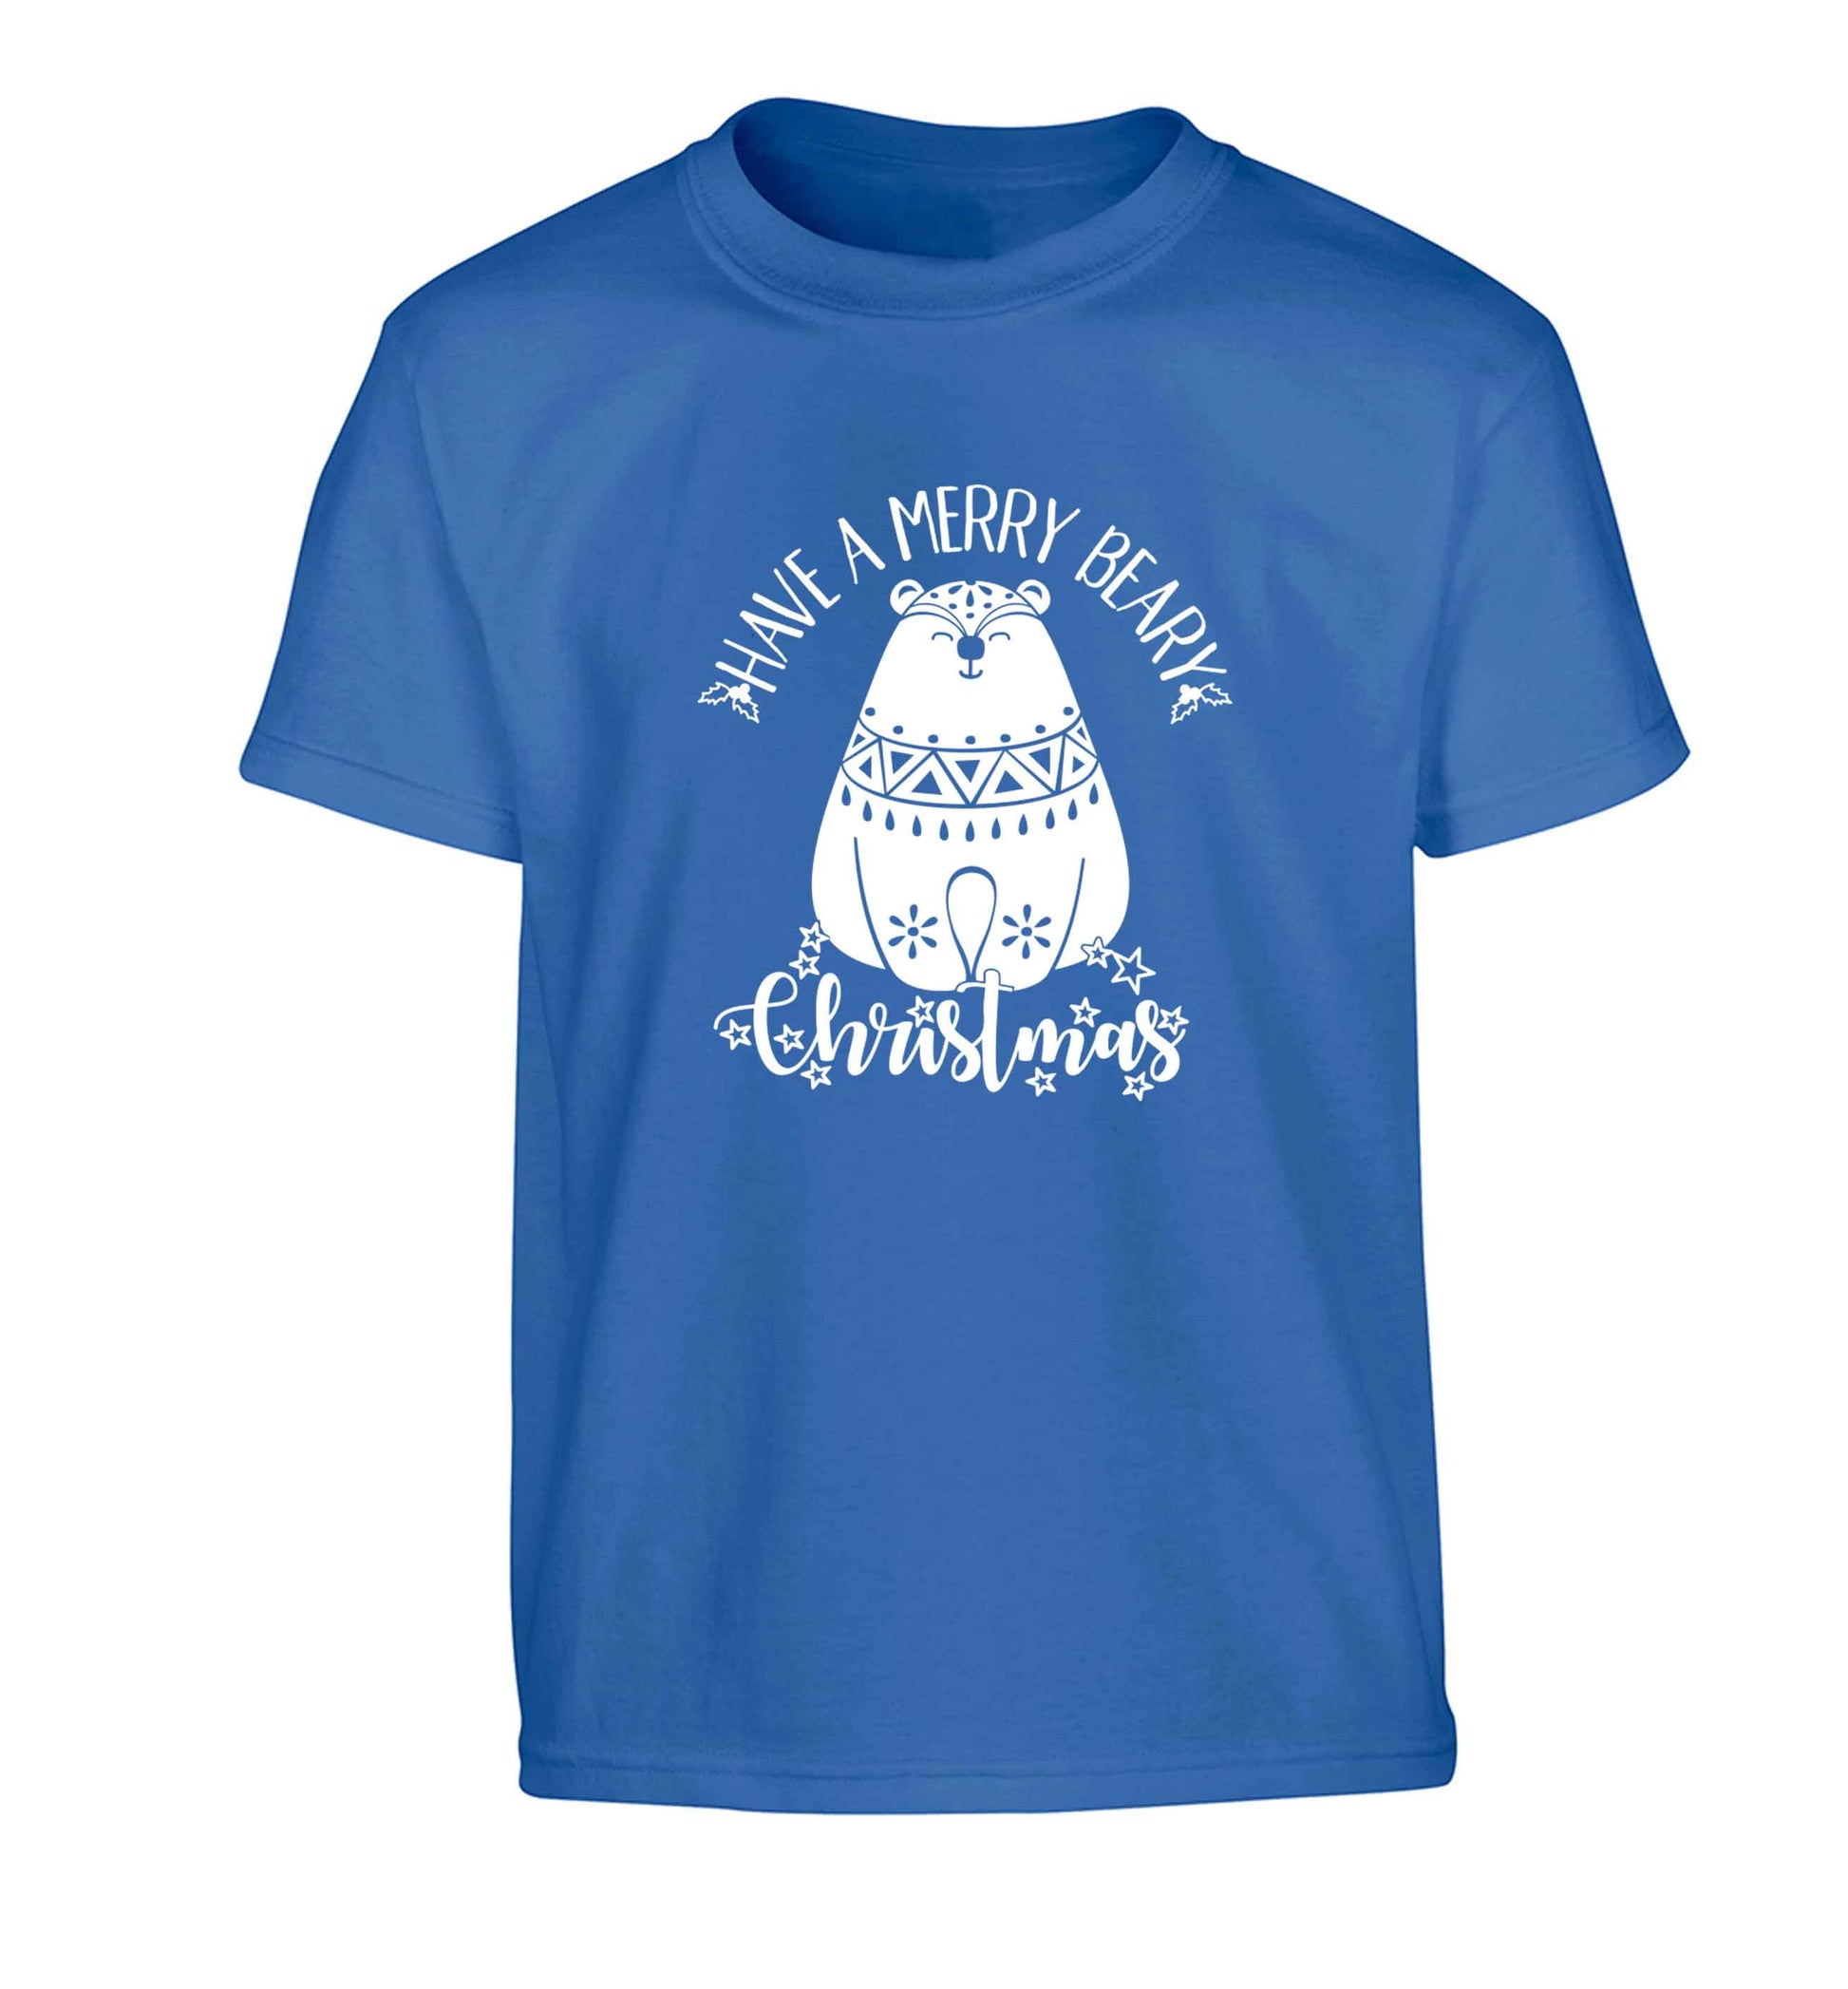 Have a merry beary Christmas Children's blue Tshirt 12-13 Years